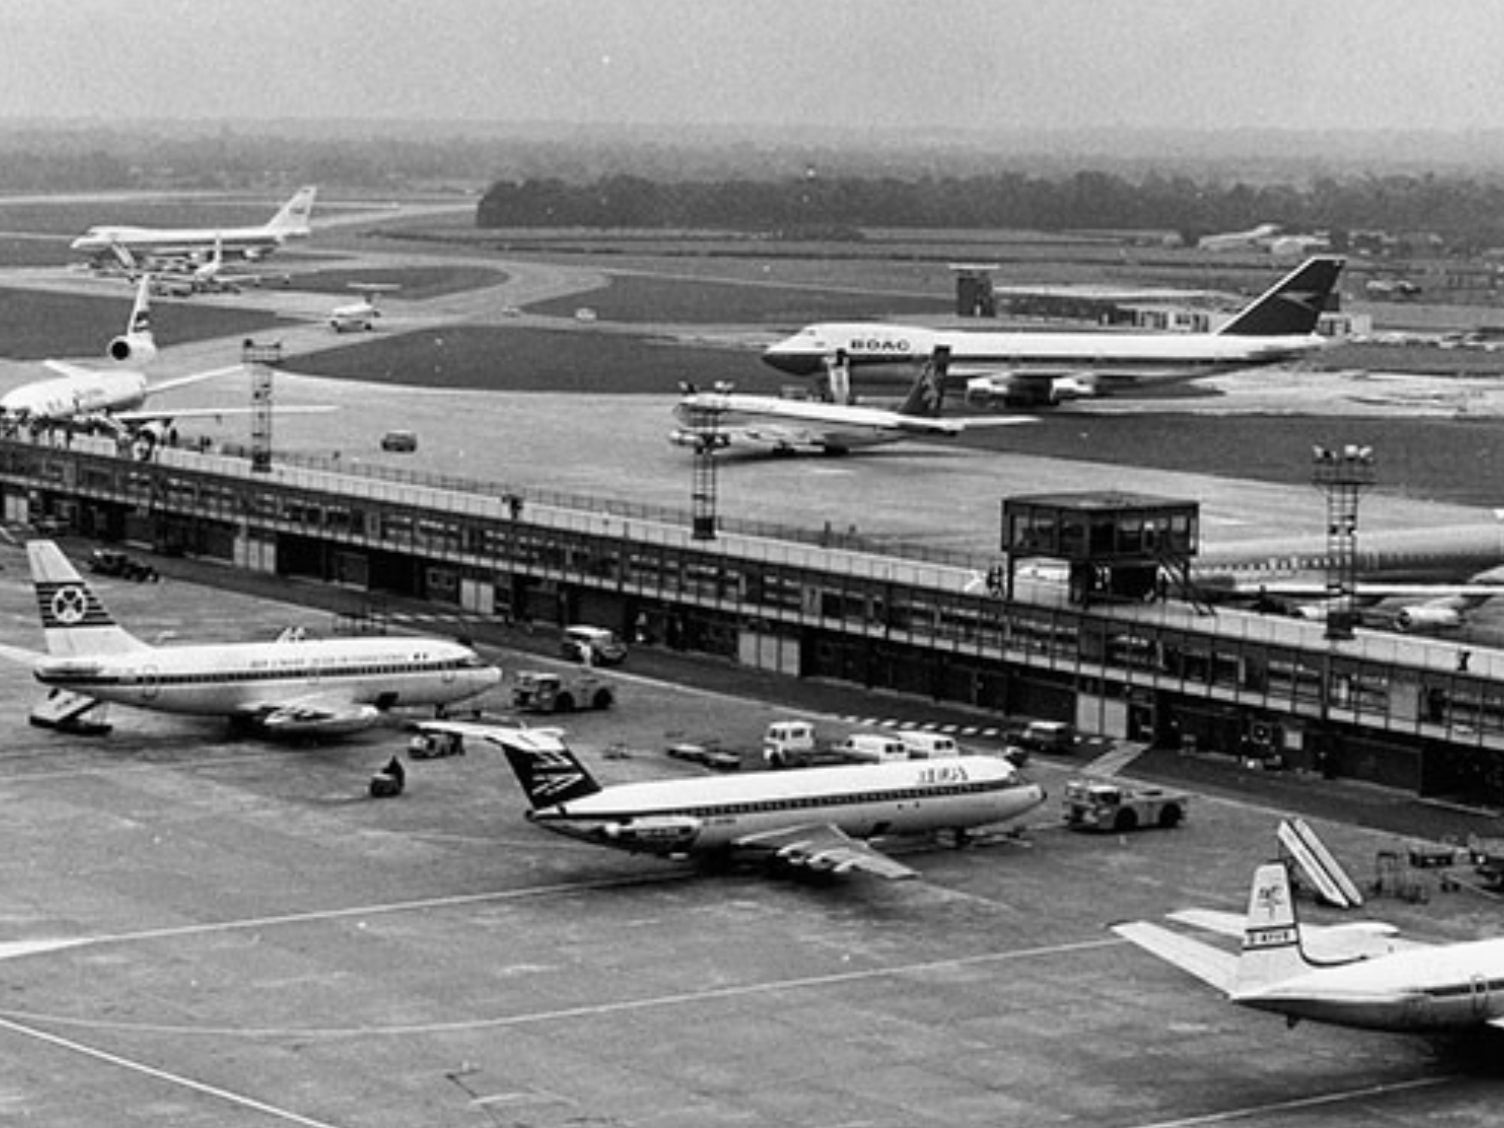 The way we were: Manchester airport around 1973. The plane bottom right is a Dan-Air Comet